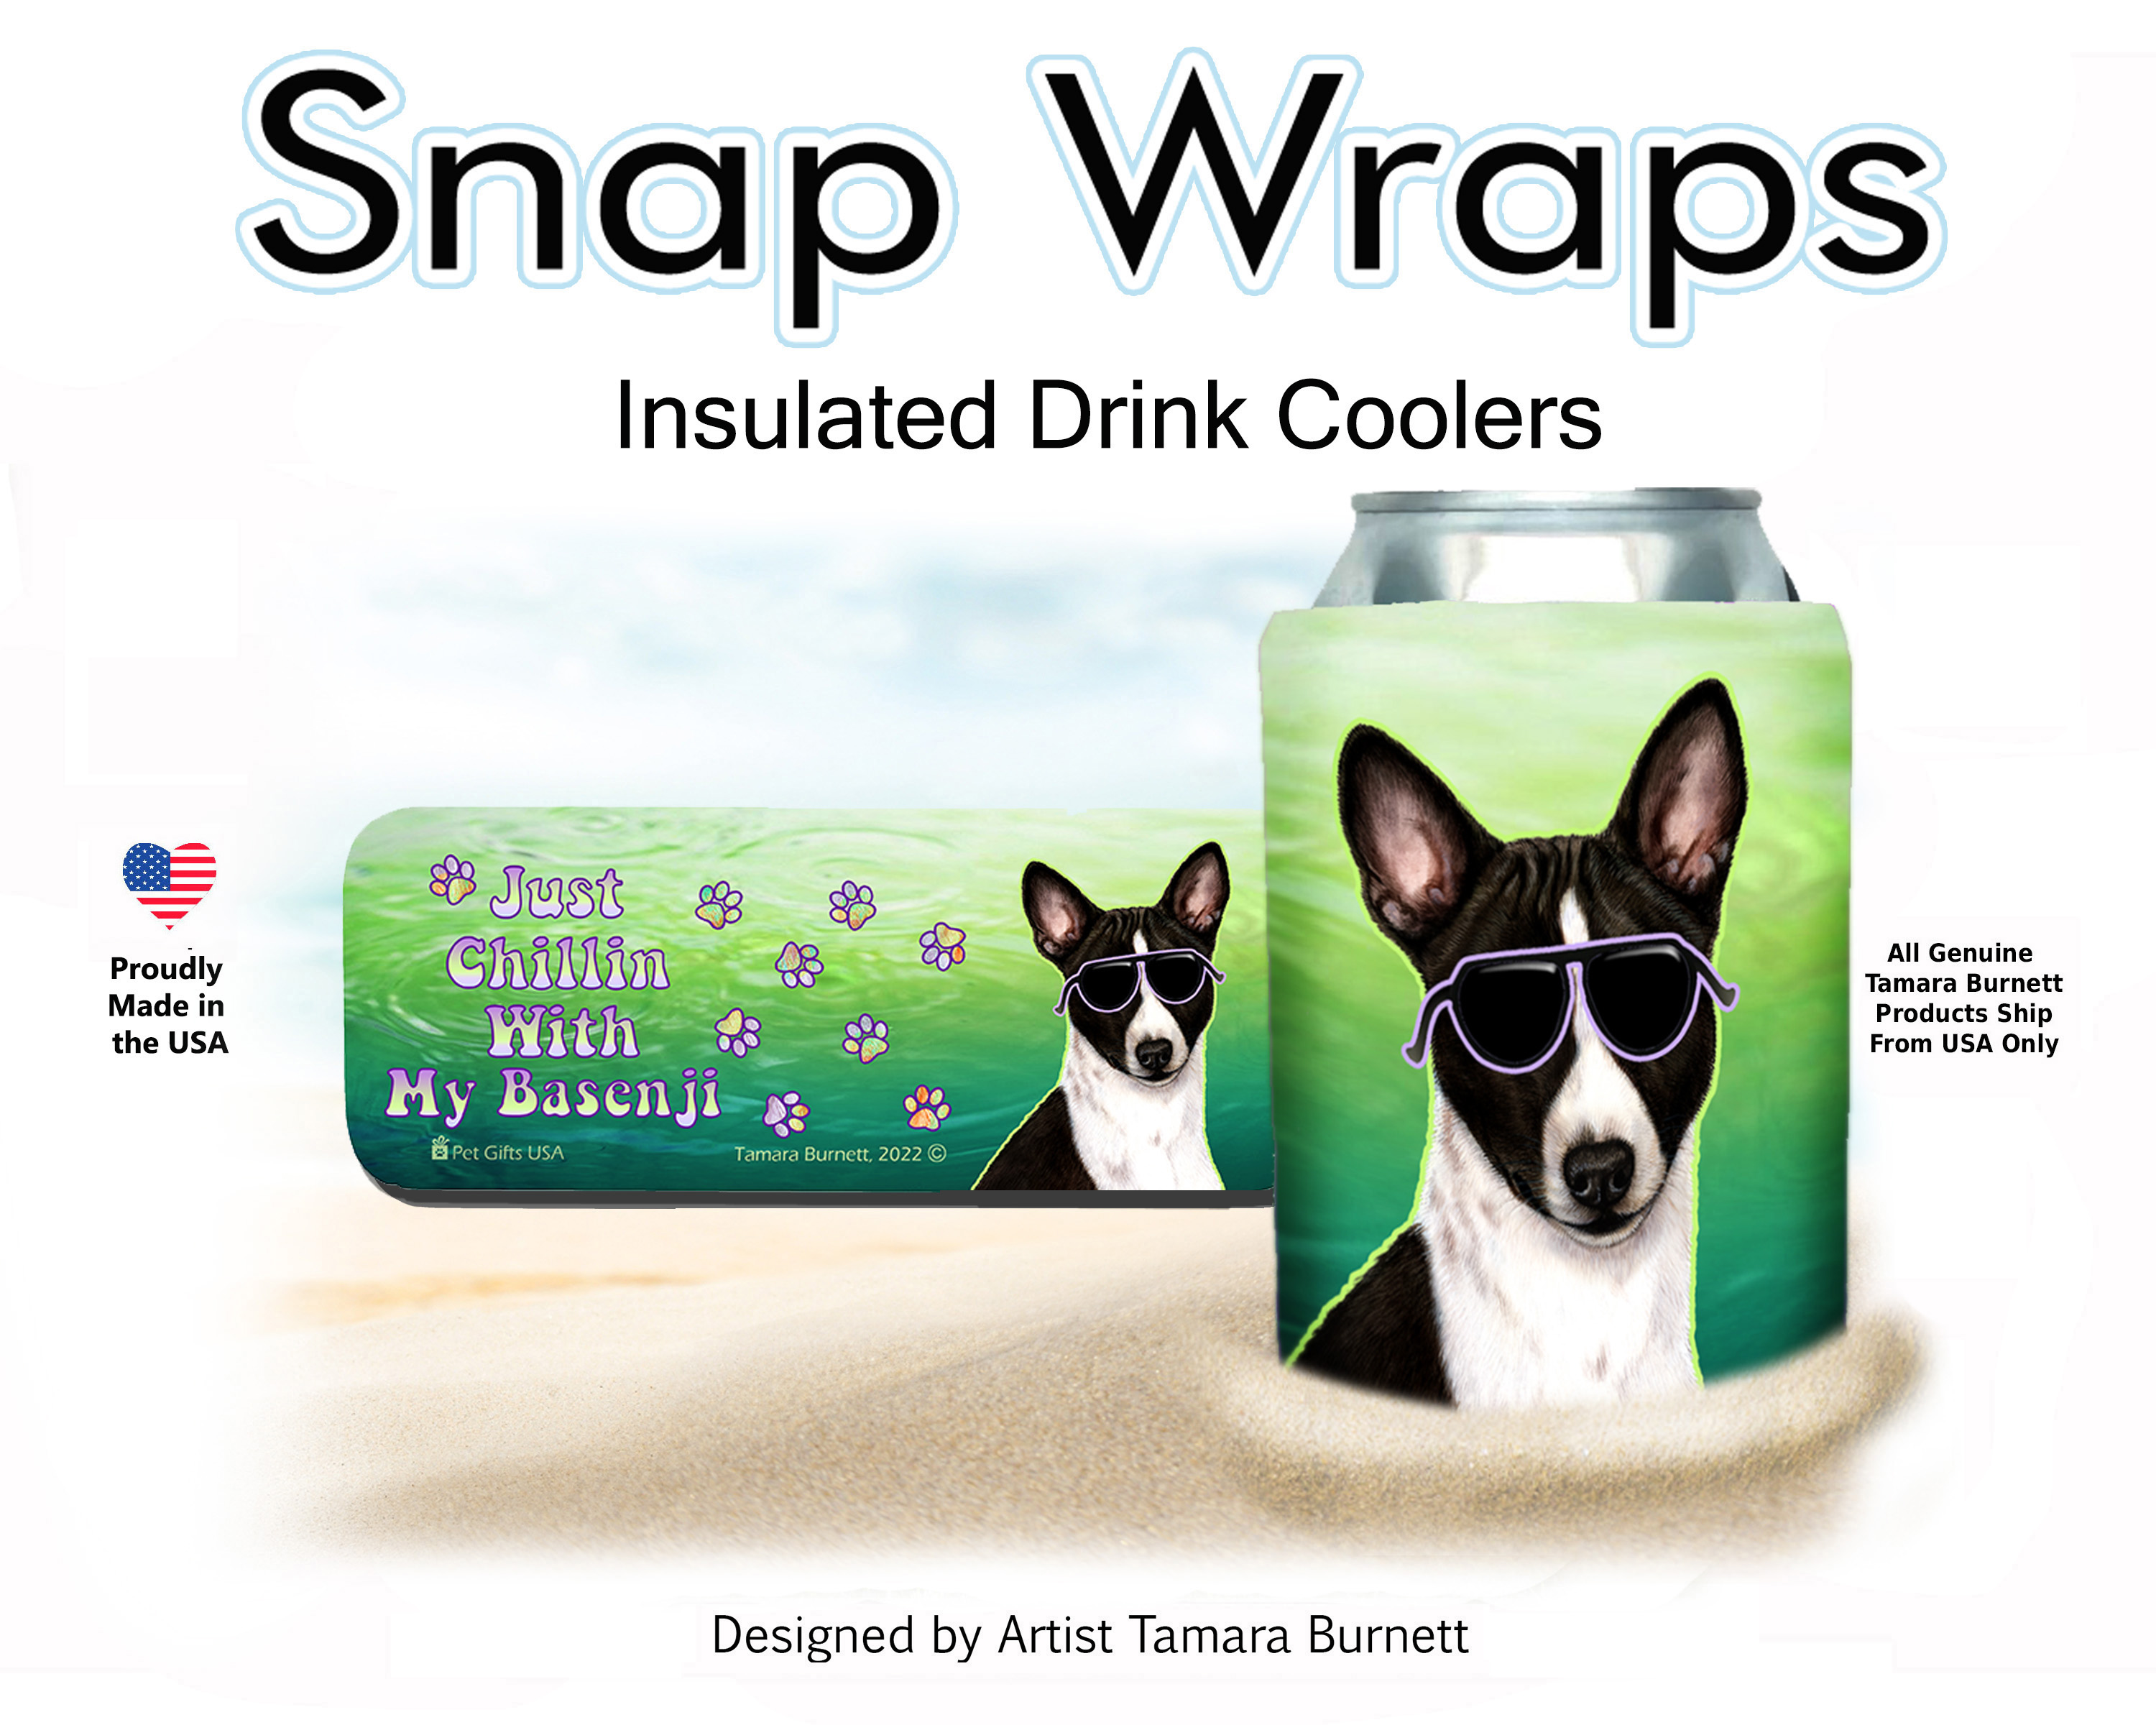 An image of the Basenji Black/White Snap Wrap Insulated Drink Holder